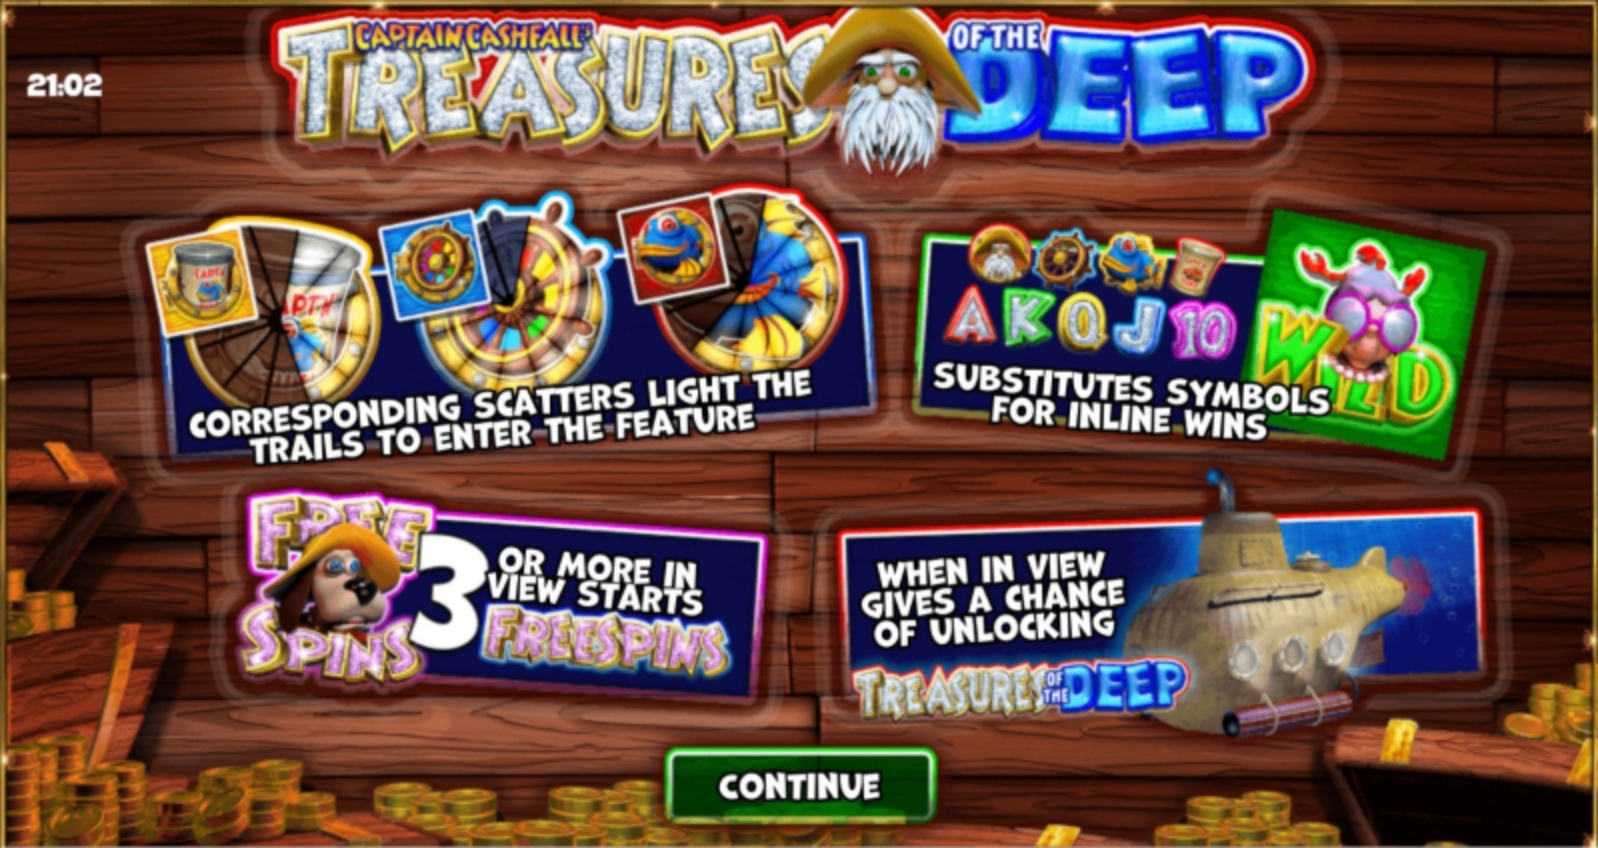 The Captain Cashfall's Treasures of the Deep Online Slot Demo Game by Storm Gaming Technology